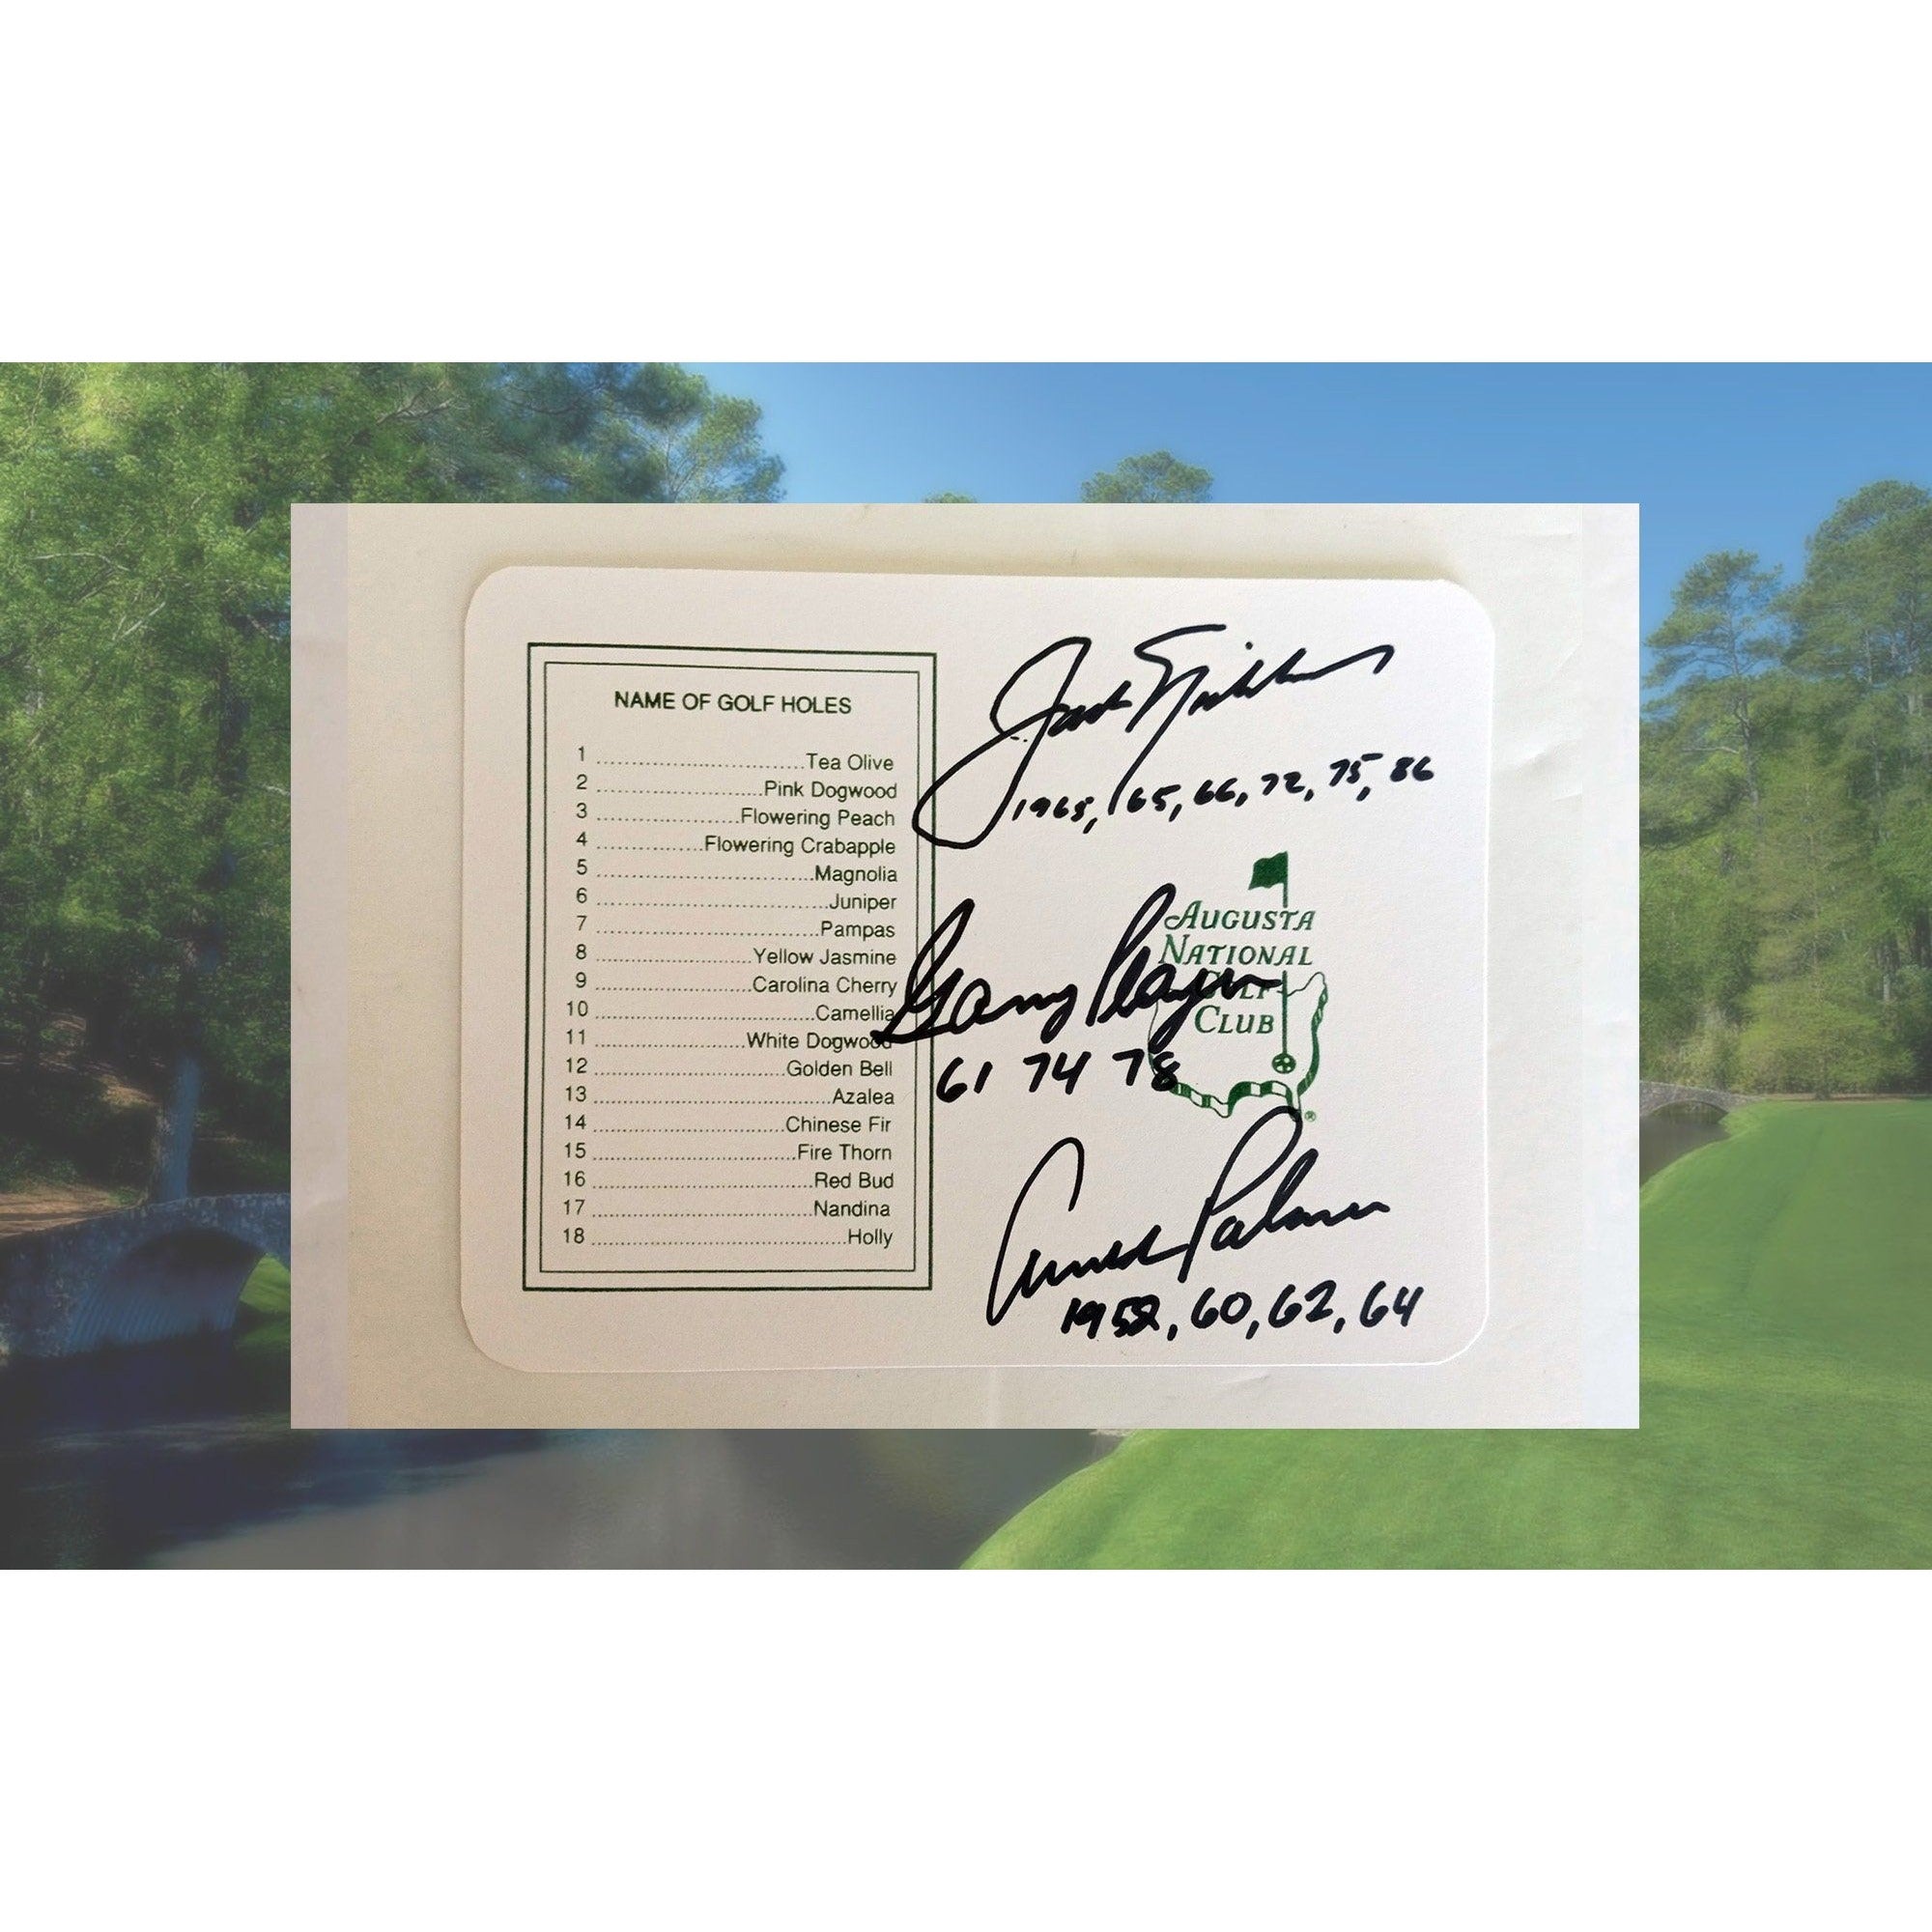 Arnold Palmer, Jack Nicklaus and Gary Player scorecard signed with proof